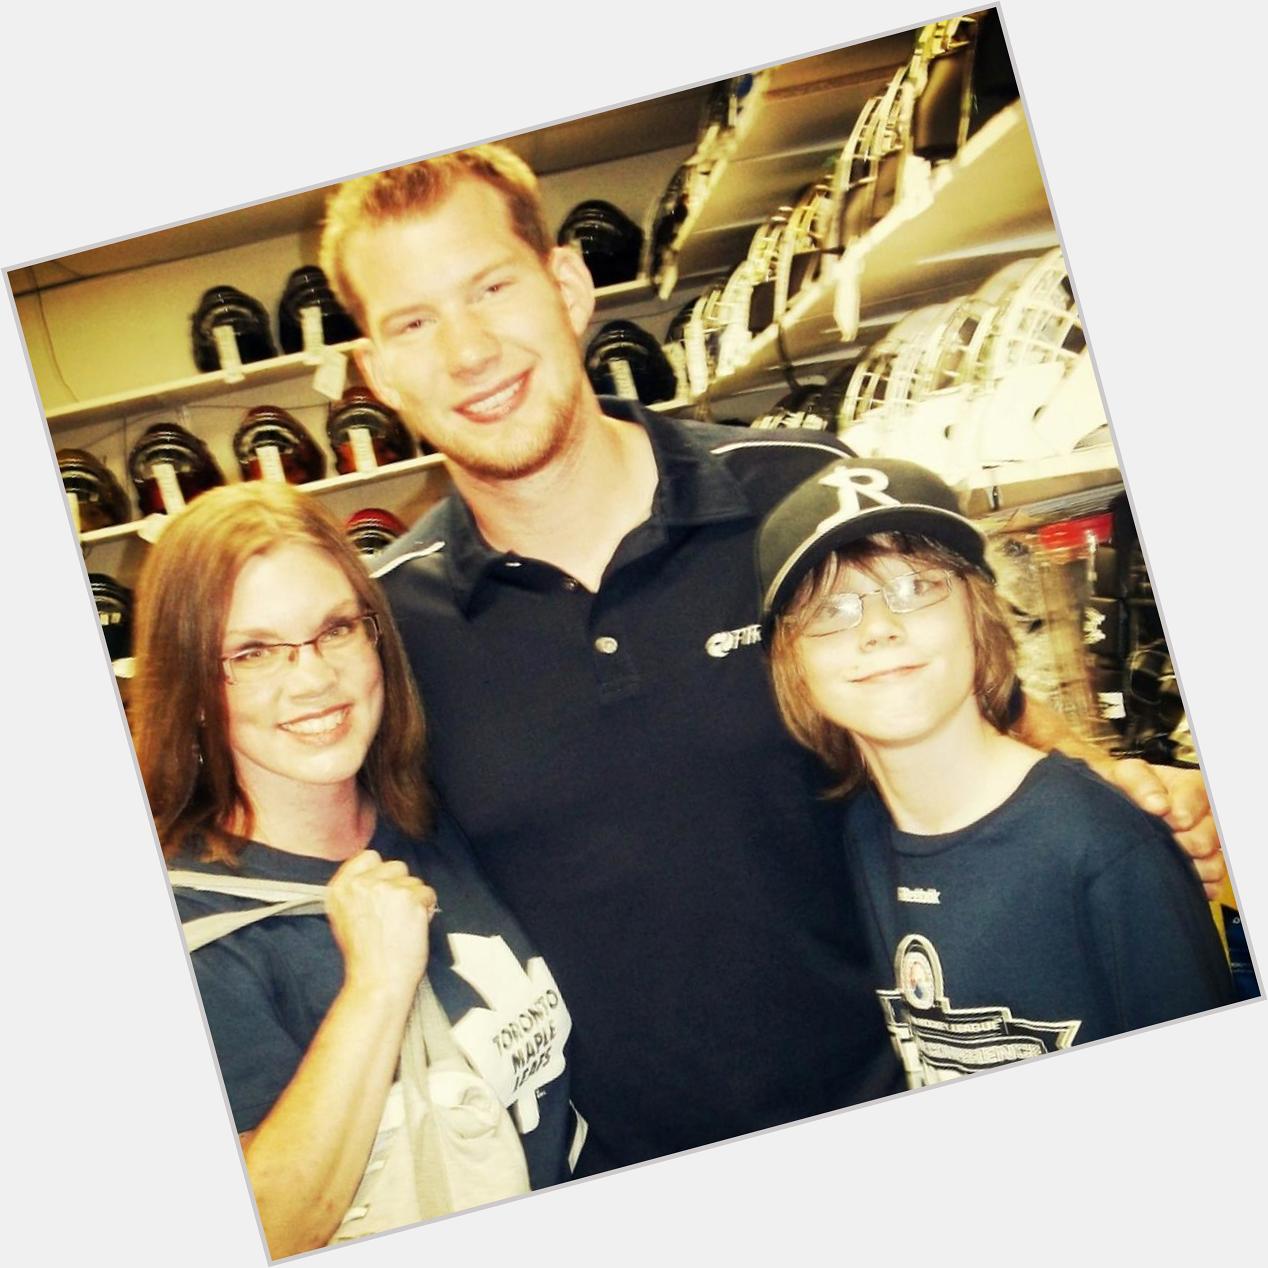 Happy Bday to our fav goalie, James Reimer! Always an inspiration to us & such a great guy  